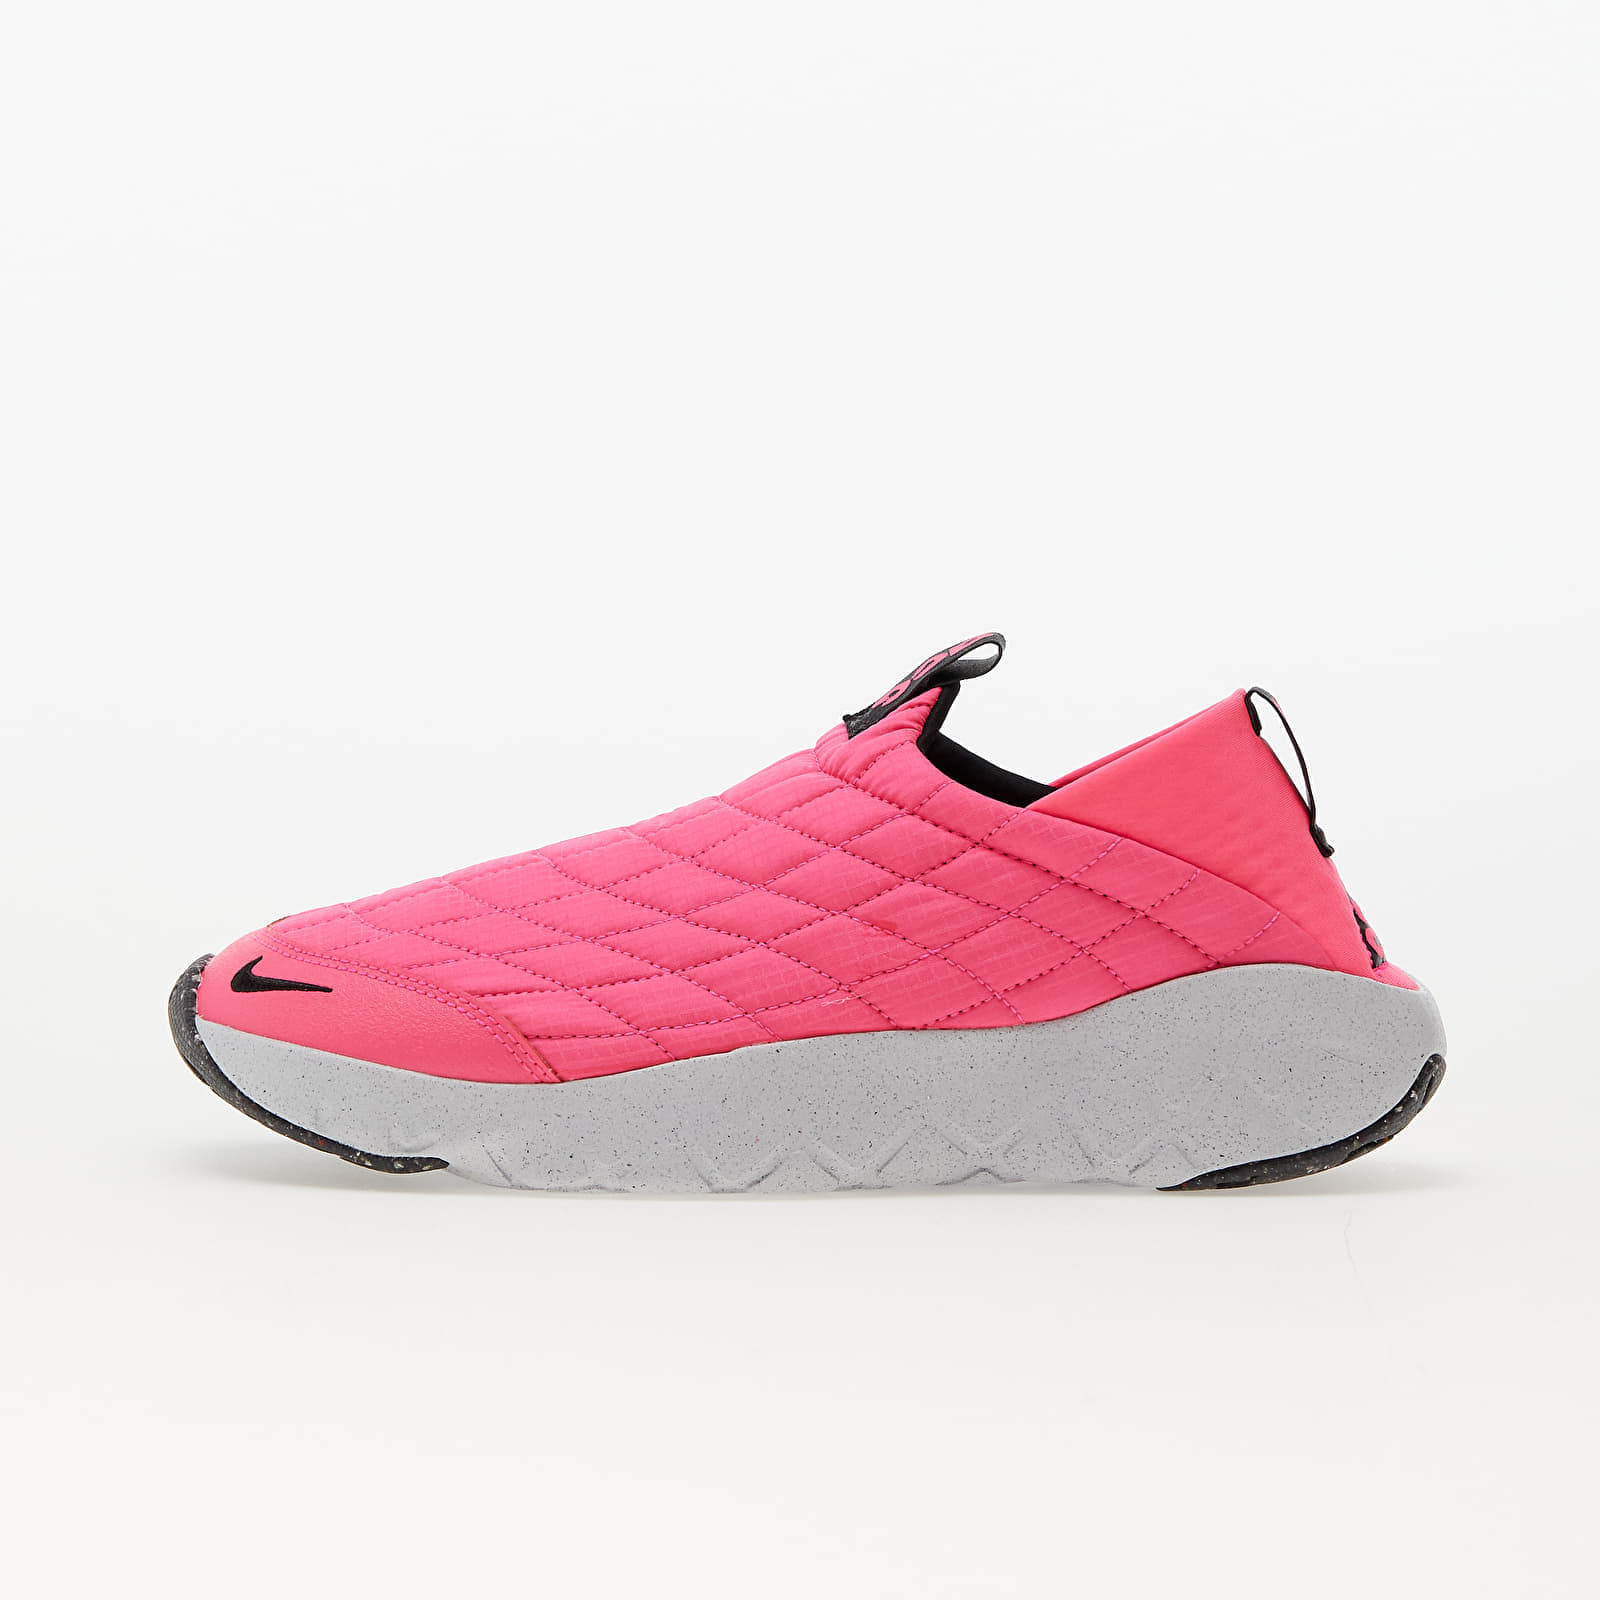 Men's sneakers and shoes Nike ACG Moc 3.5 Hyper Pink/ Hyper Pink-Black-White